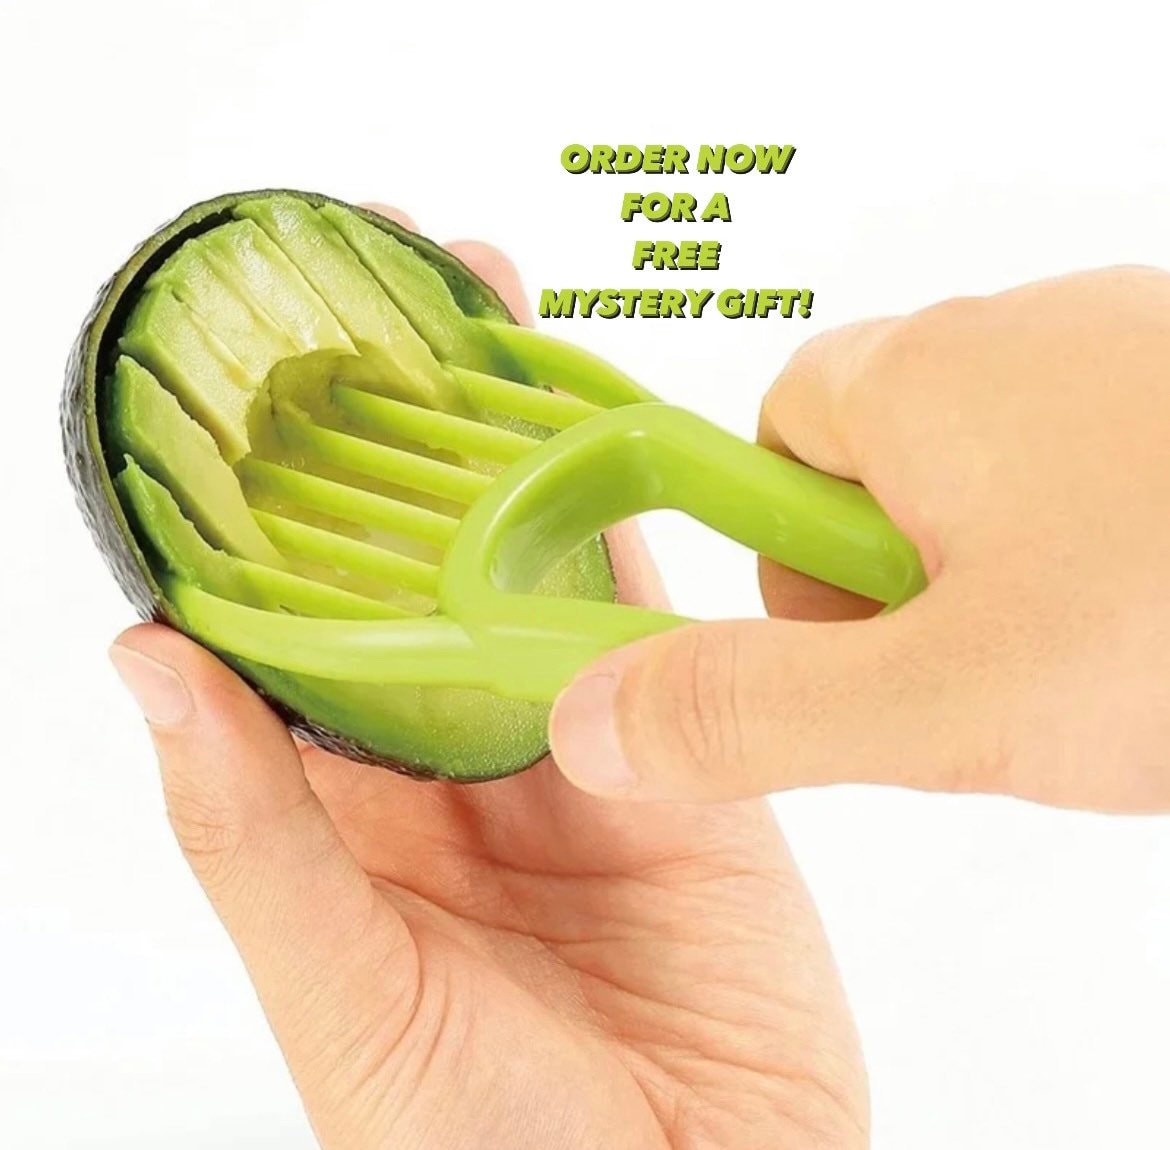 Handy Housewares 2-in-1 Avocado Slicer Tool with Plastic Blade and